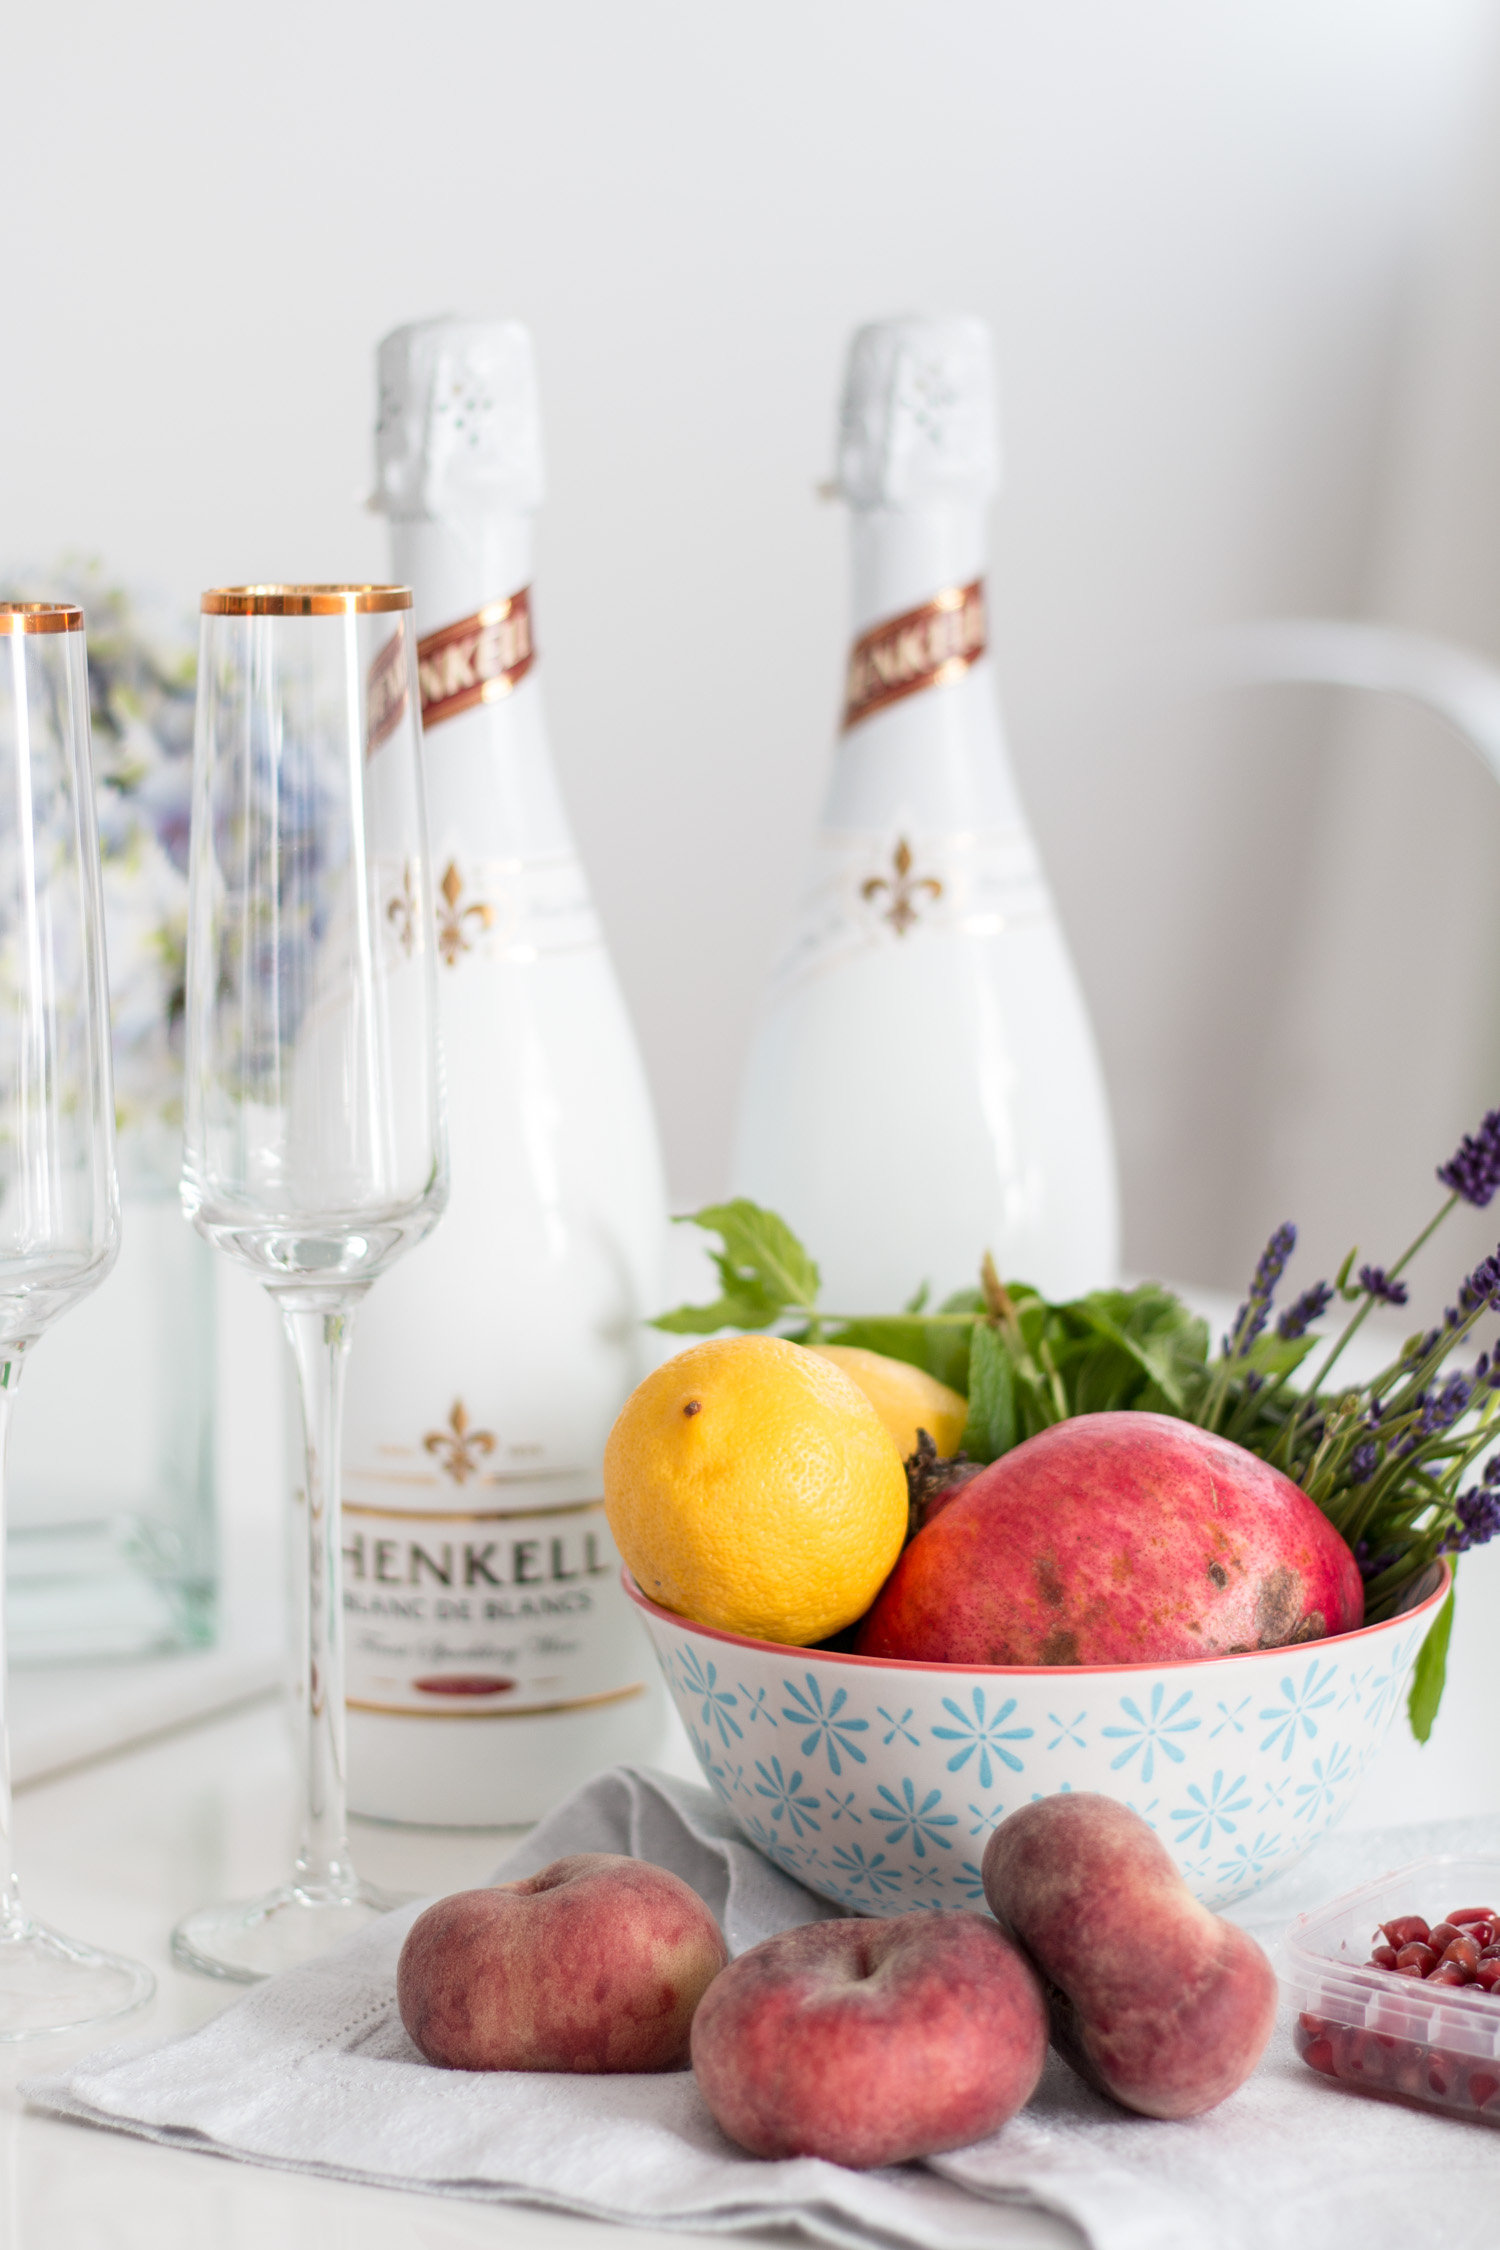 Henkell Blanc de Blancs Secco Bar | The Daily Dose